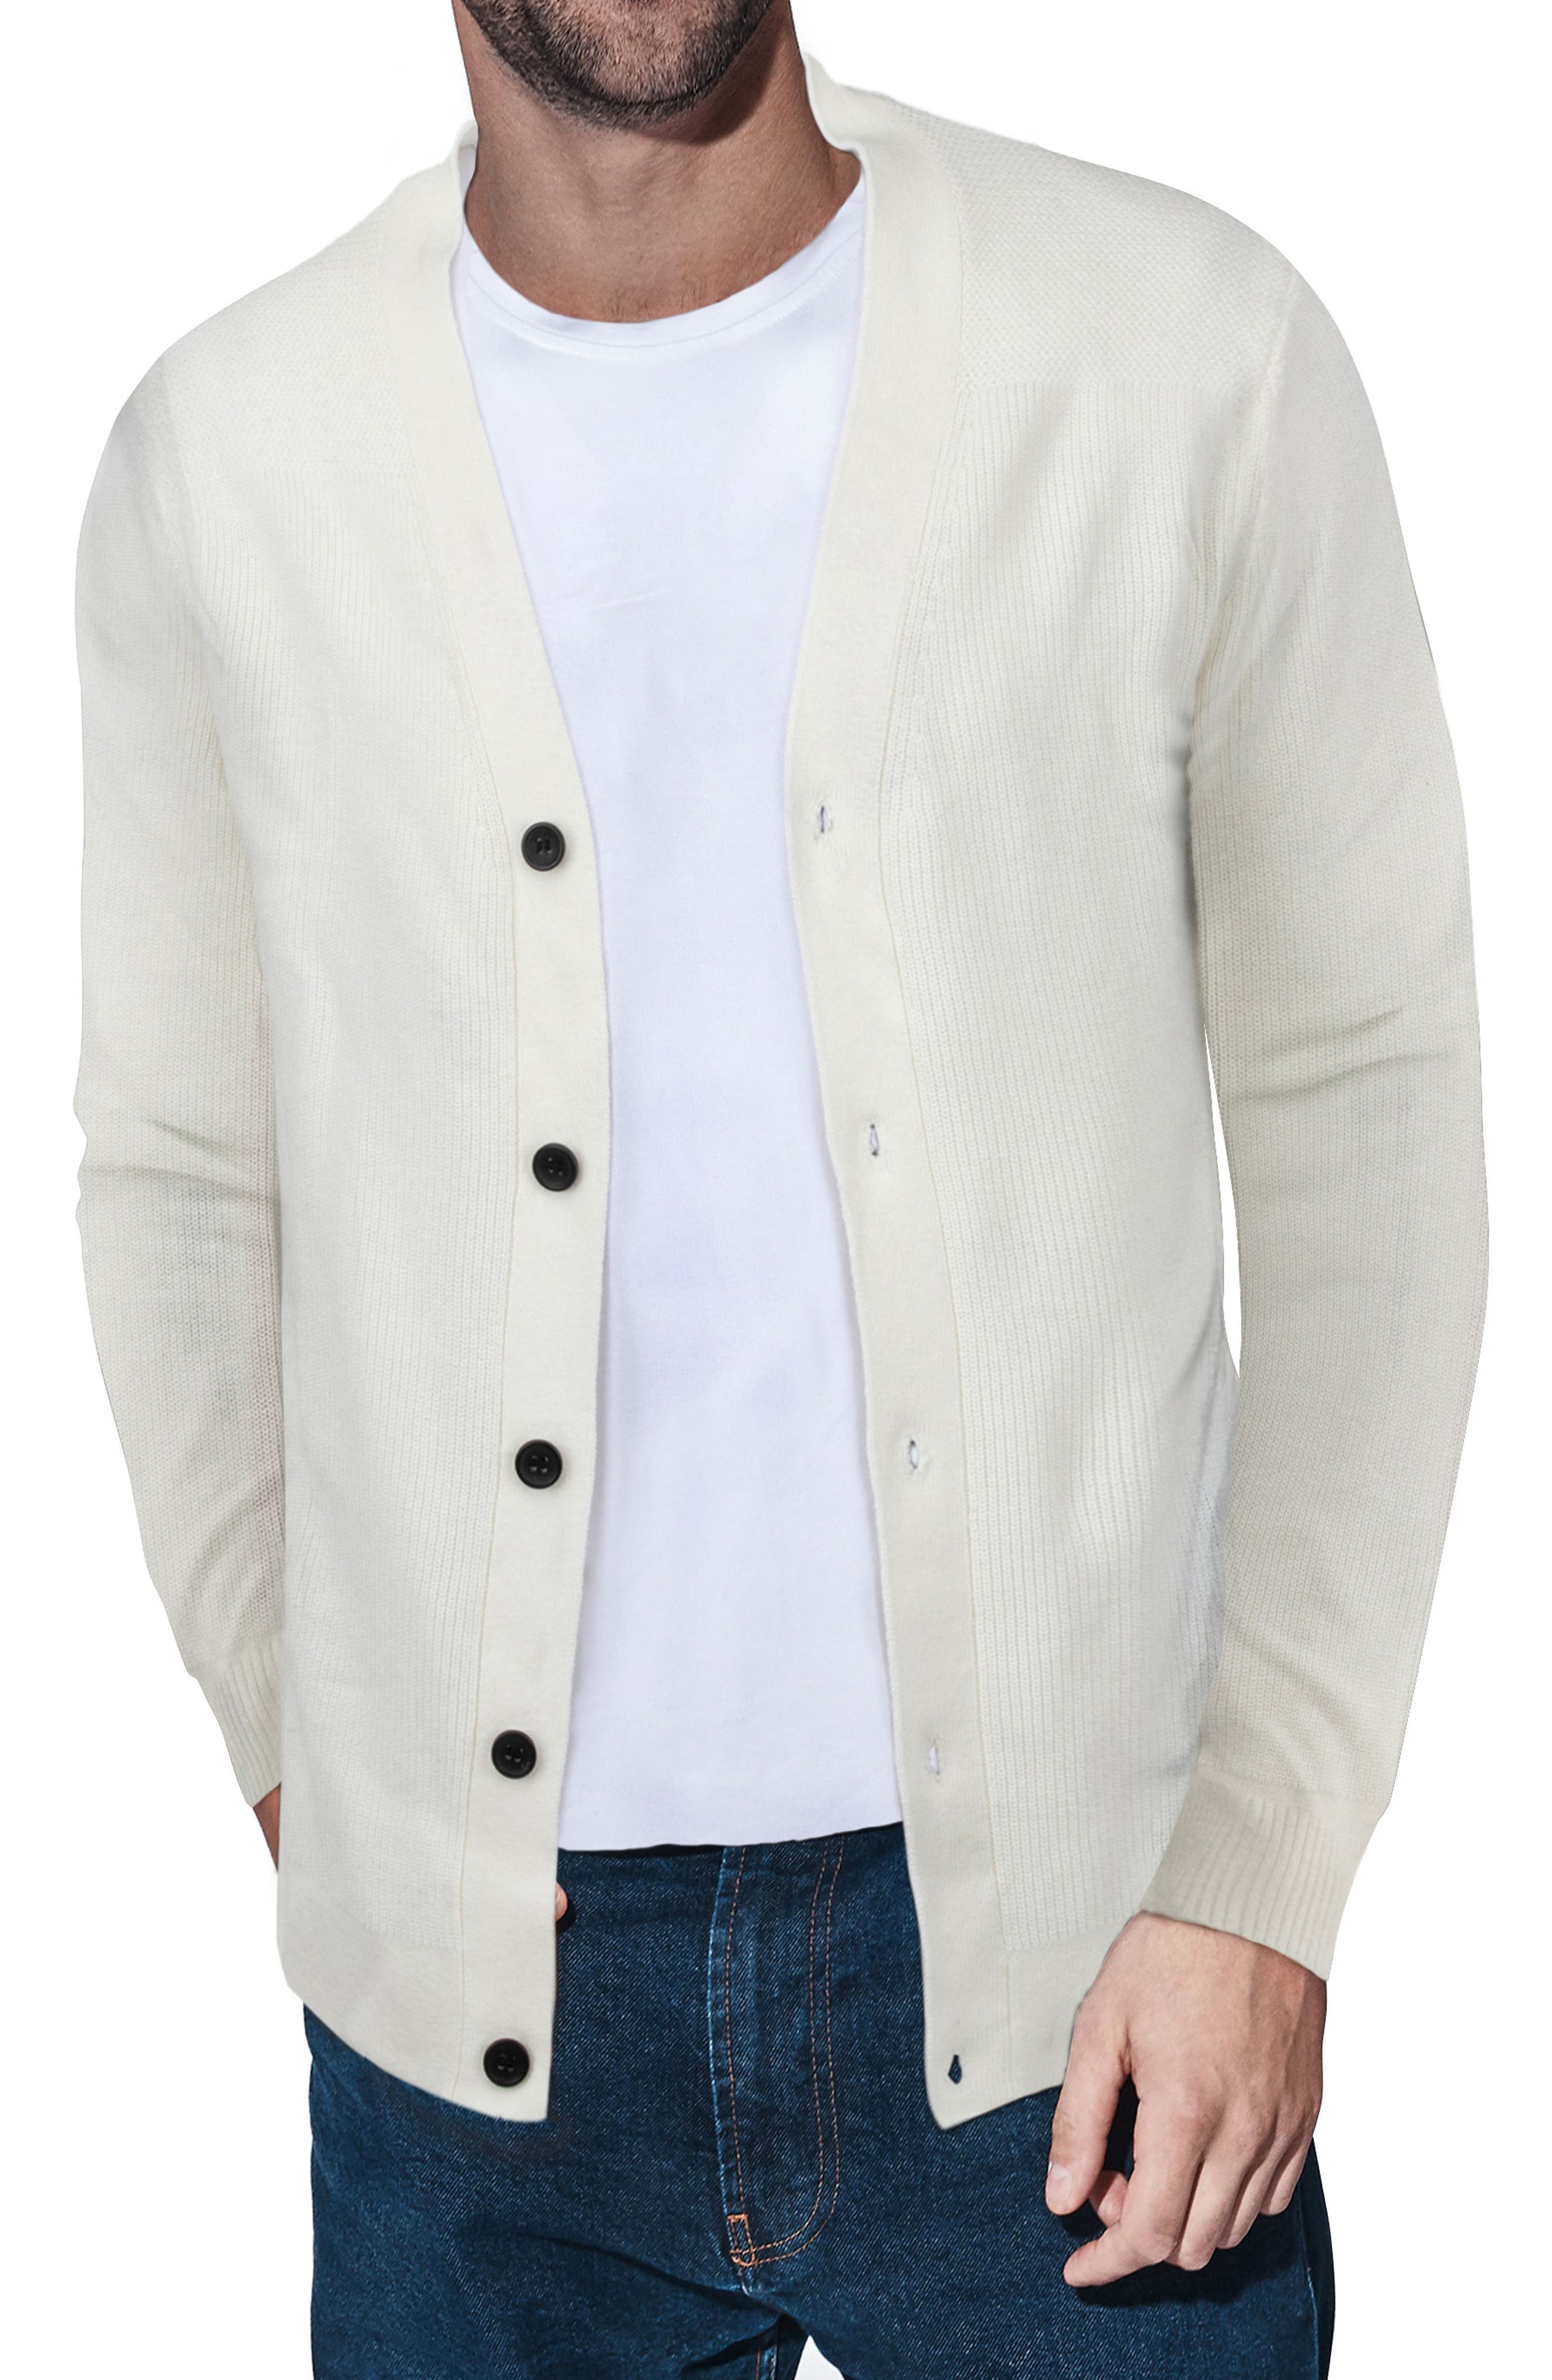 Mens Fashion Quilted Sweatshirt Buttoned Cardigan Top Jacket S-XL 